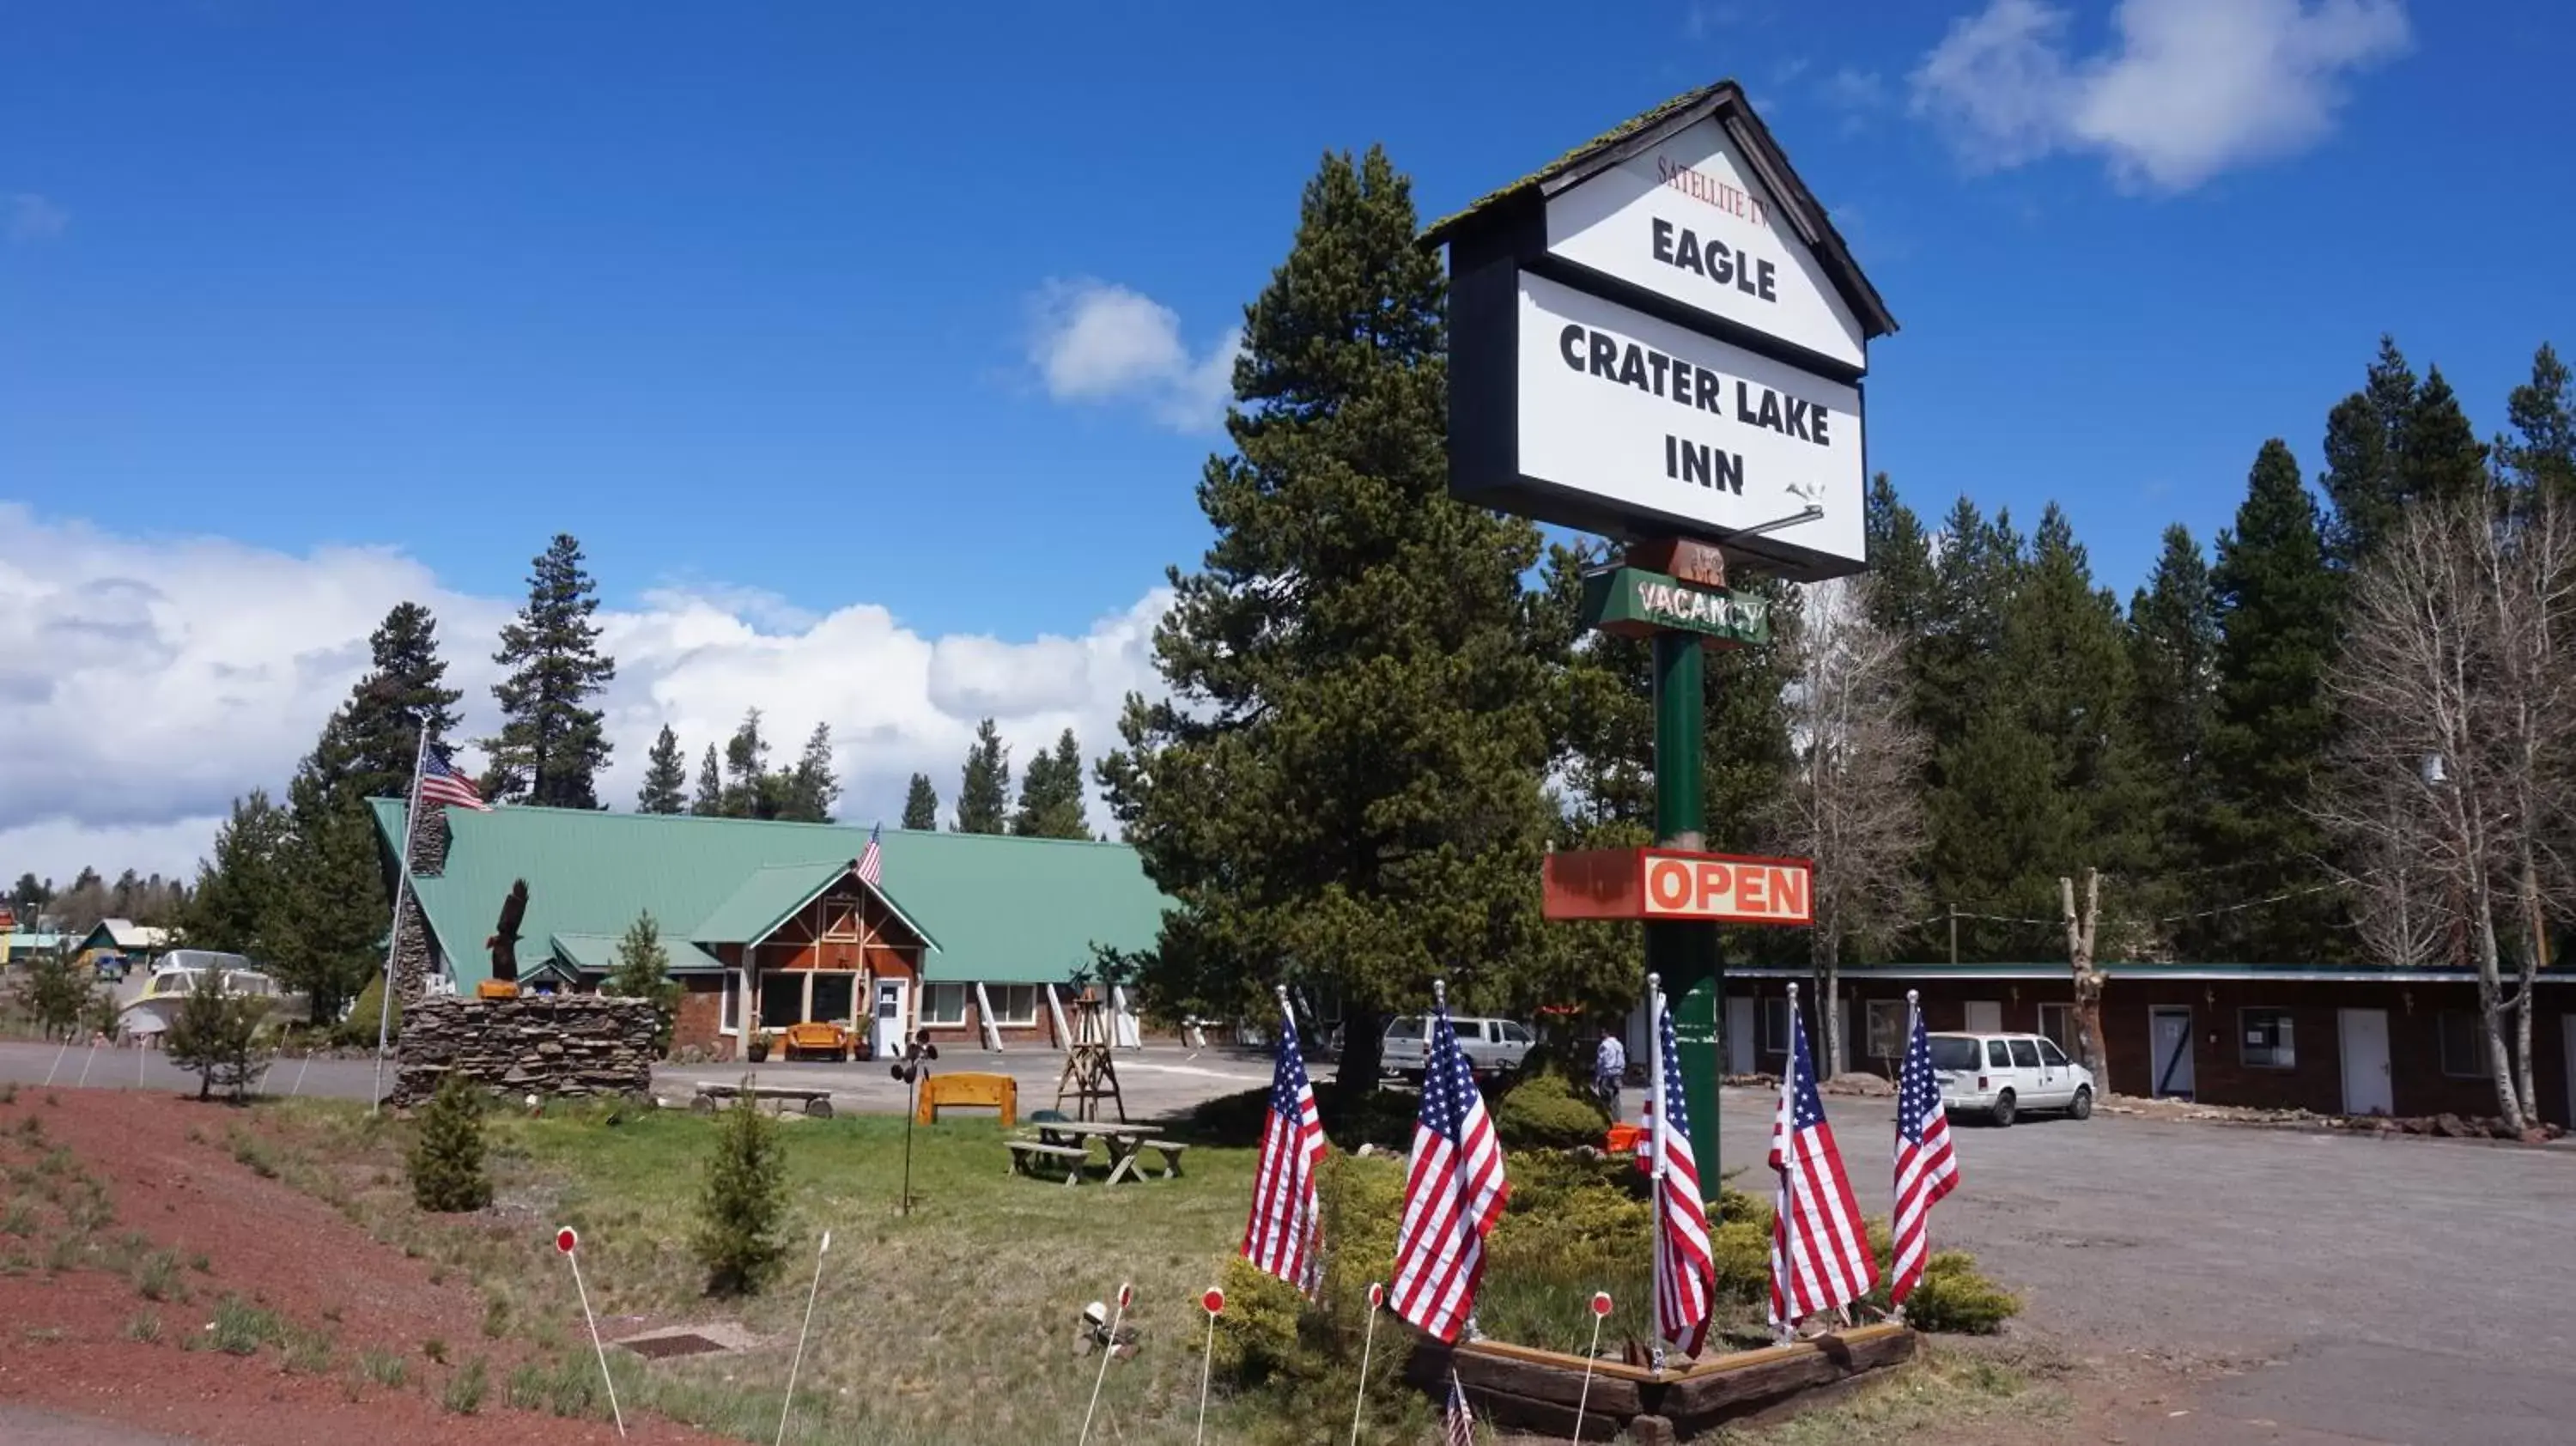 Property building in Eagle Crater Lake Inn